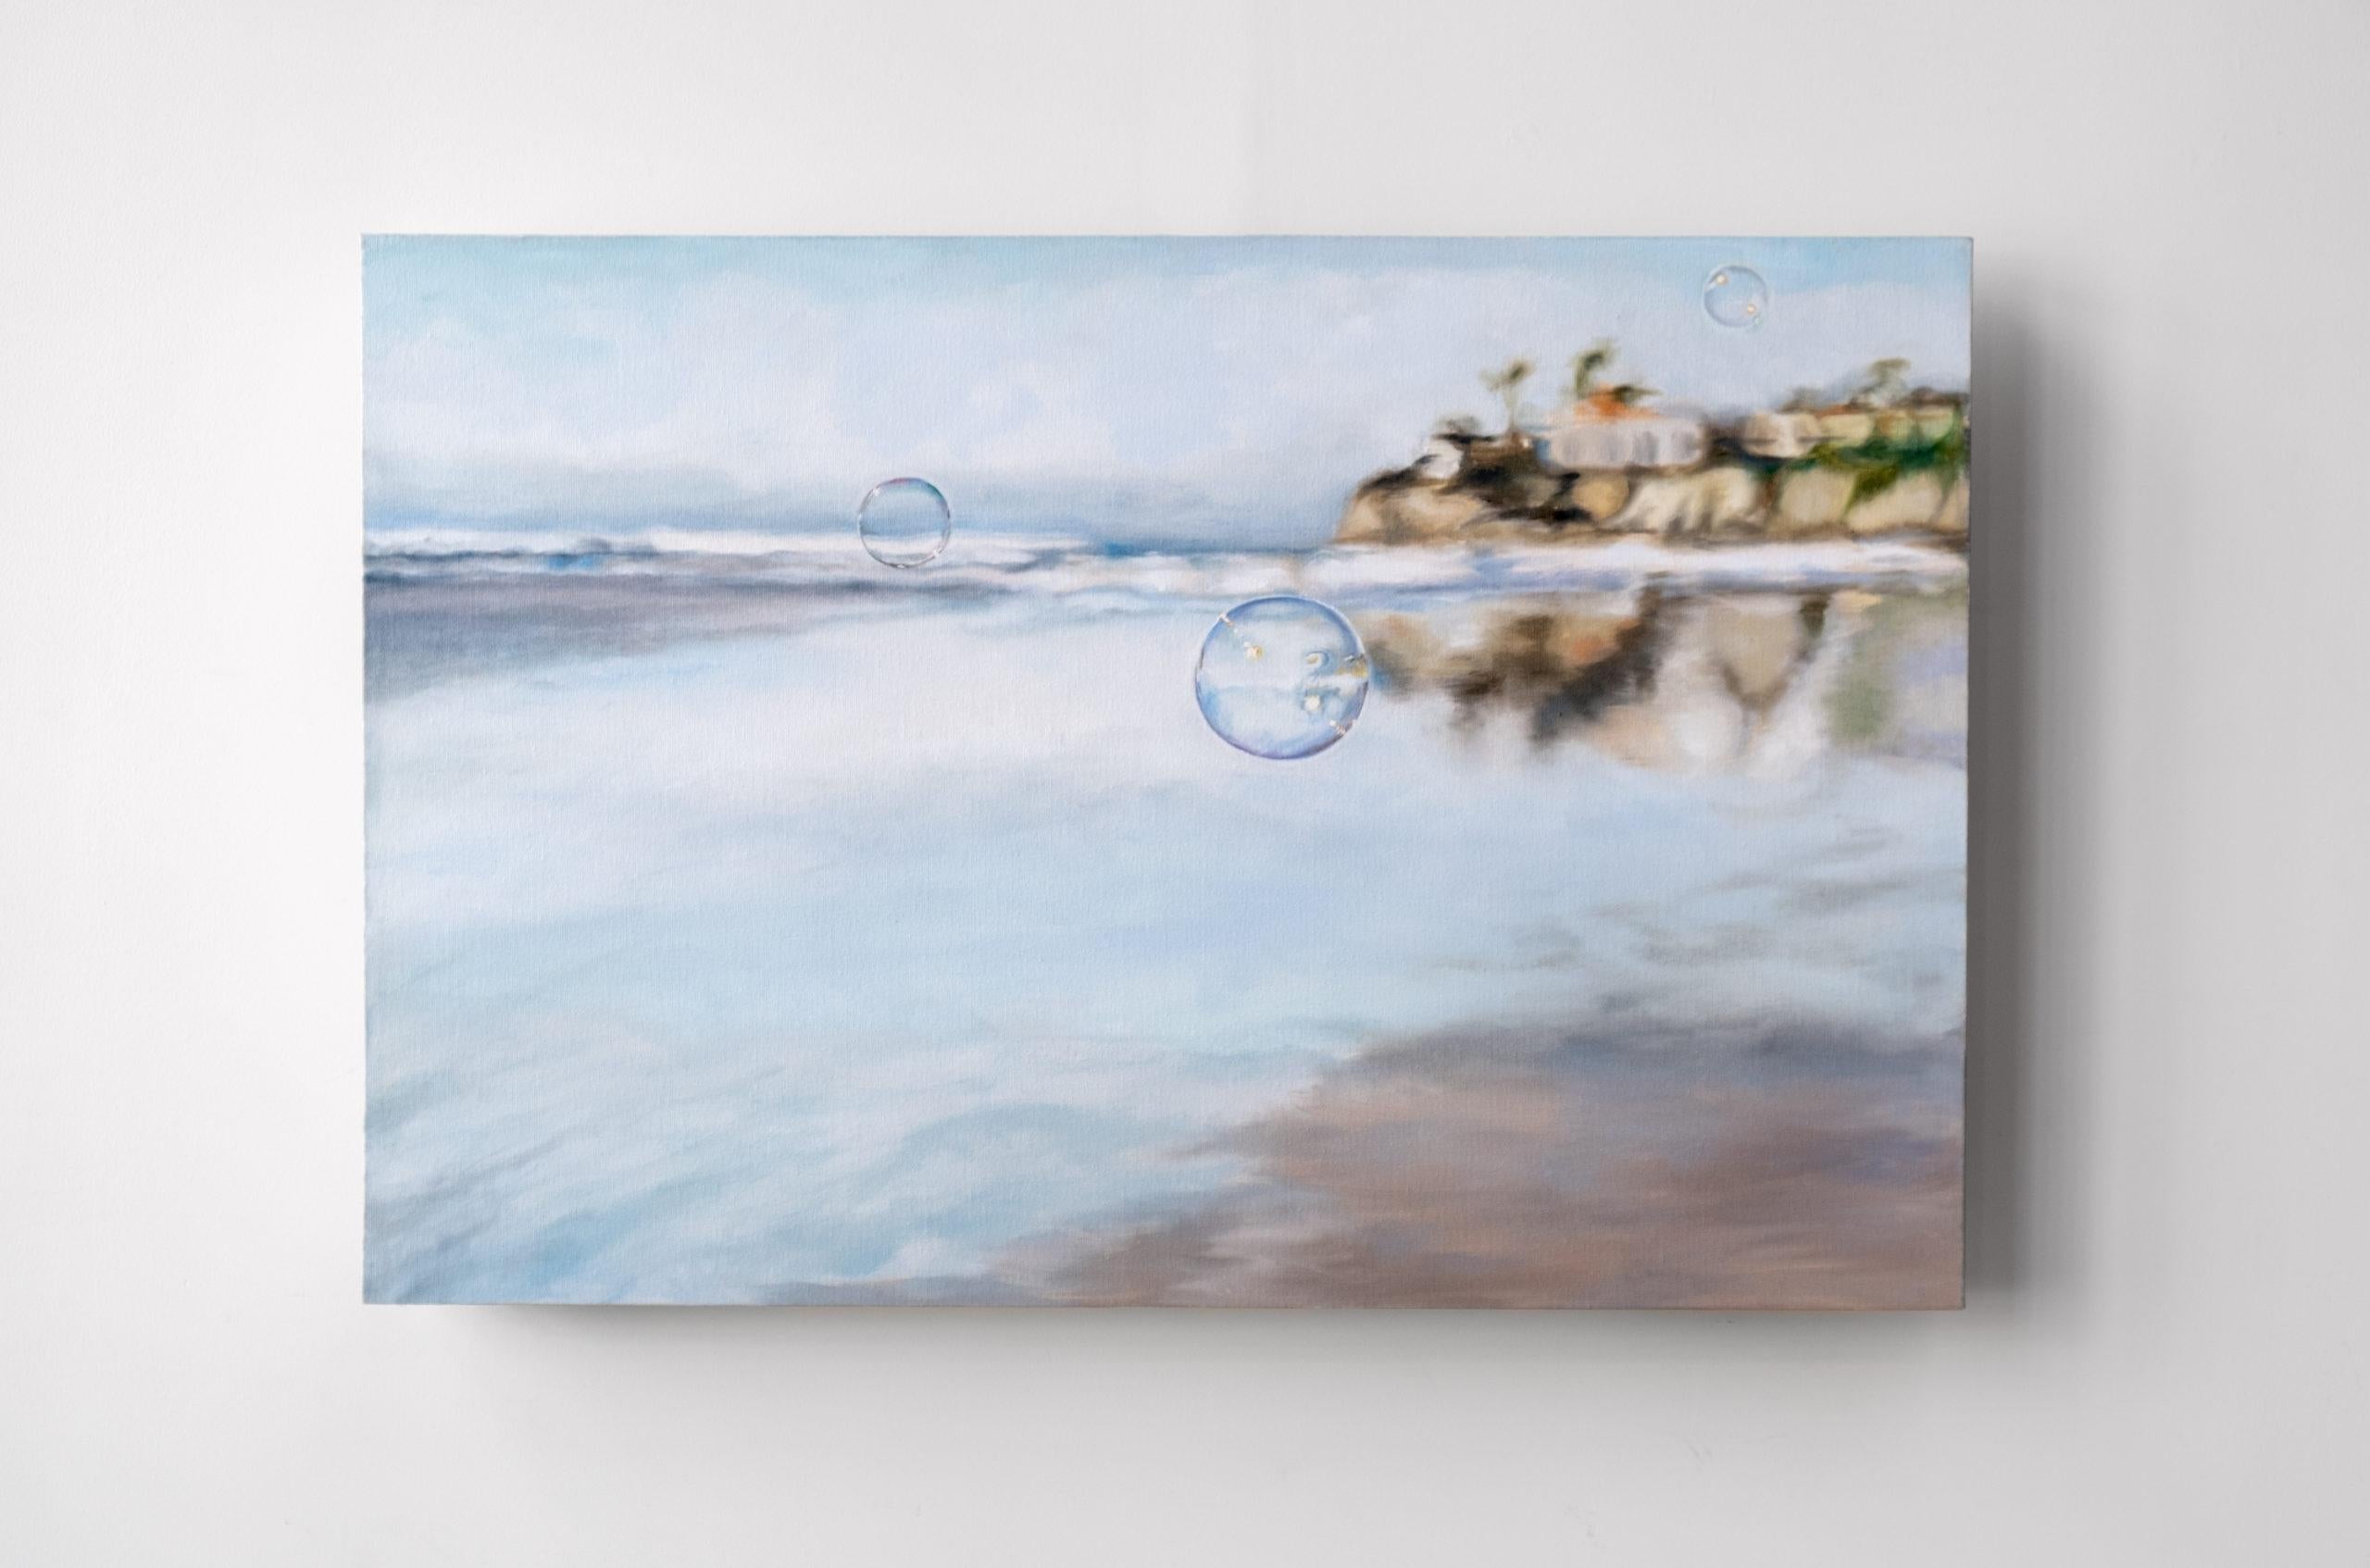 A Realist Oil on Canvas Seascape, 